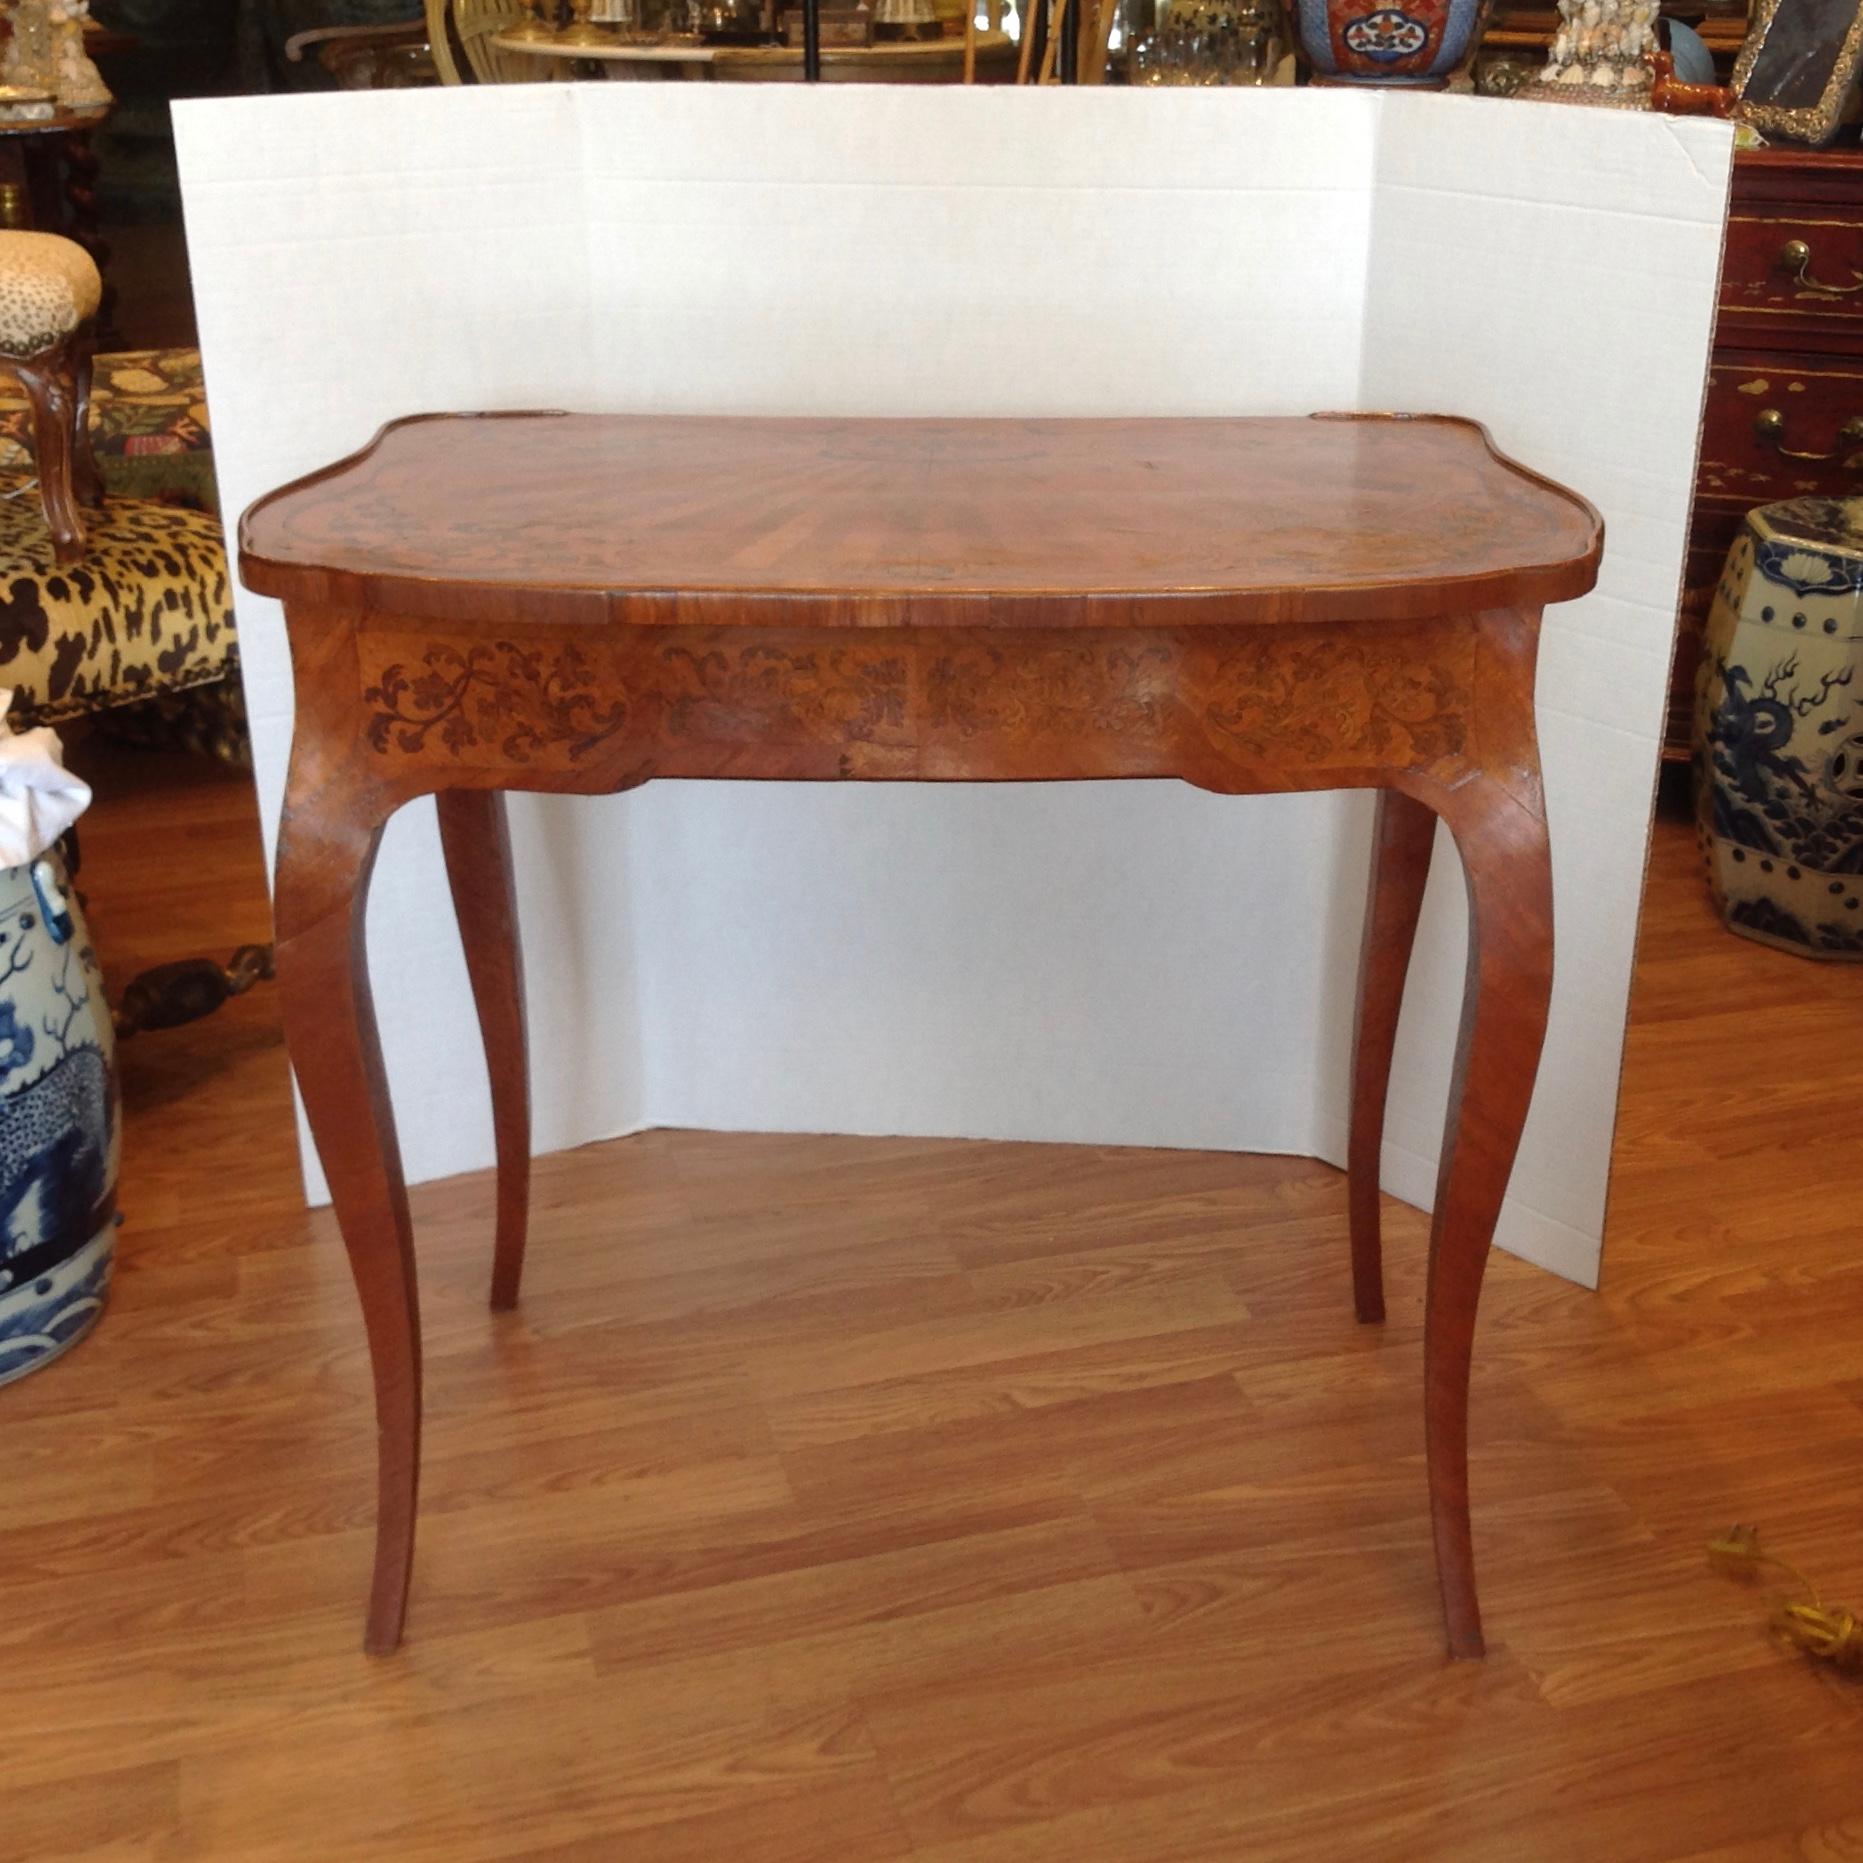 Leather Superior 19th Century French Inlaid Vanity / Desk